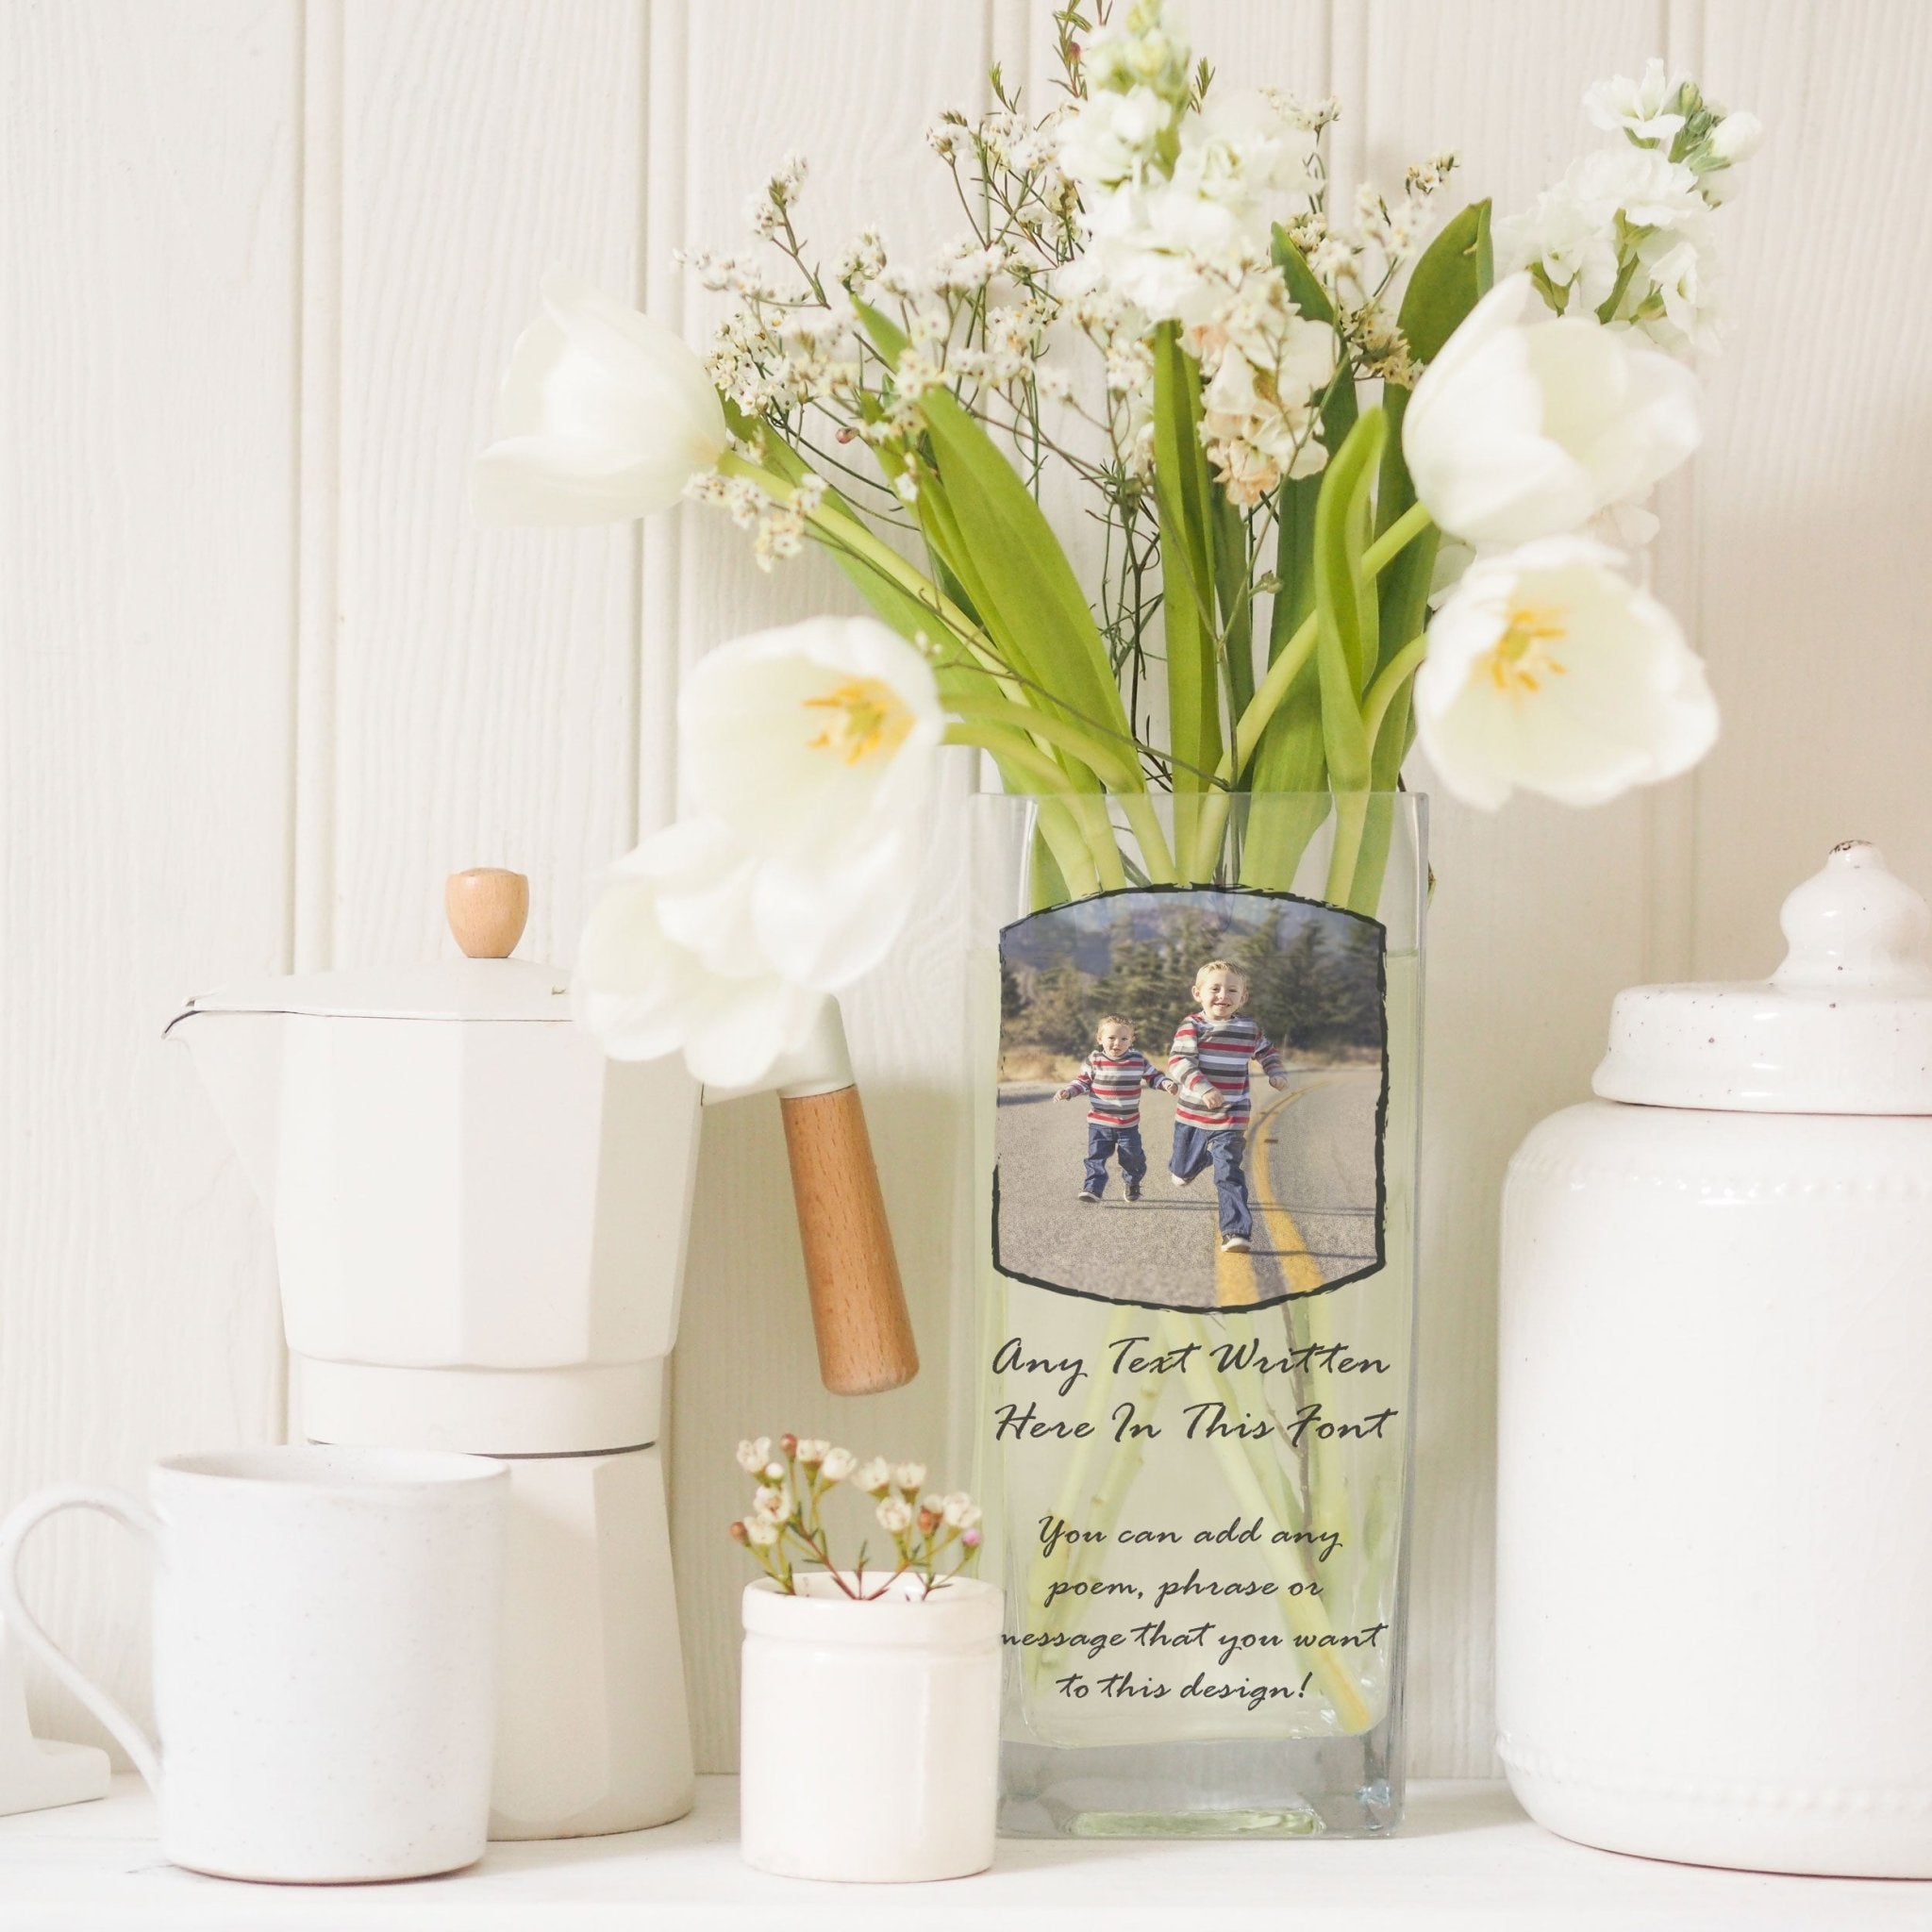 Big Brother Custom Photo Glass Vase | Unique Family Gift Ideas for Bro | Personalised Crystal Flower Stand with Picture | Home Decor Present Vase - Unique Prints